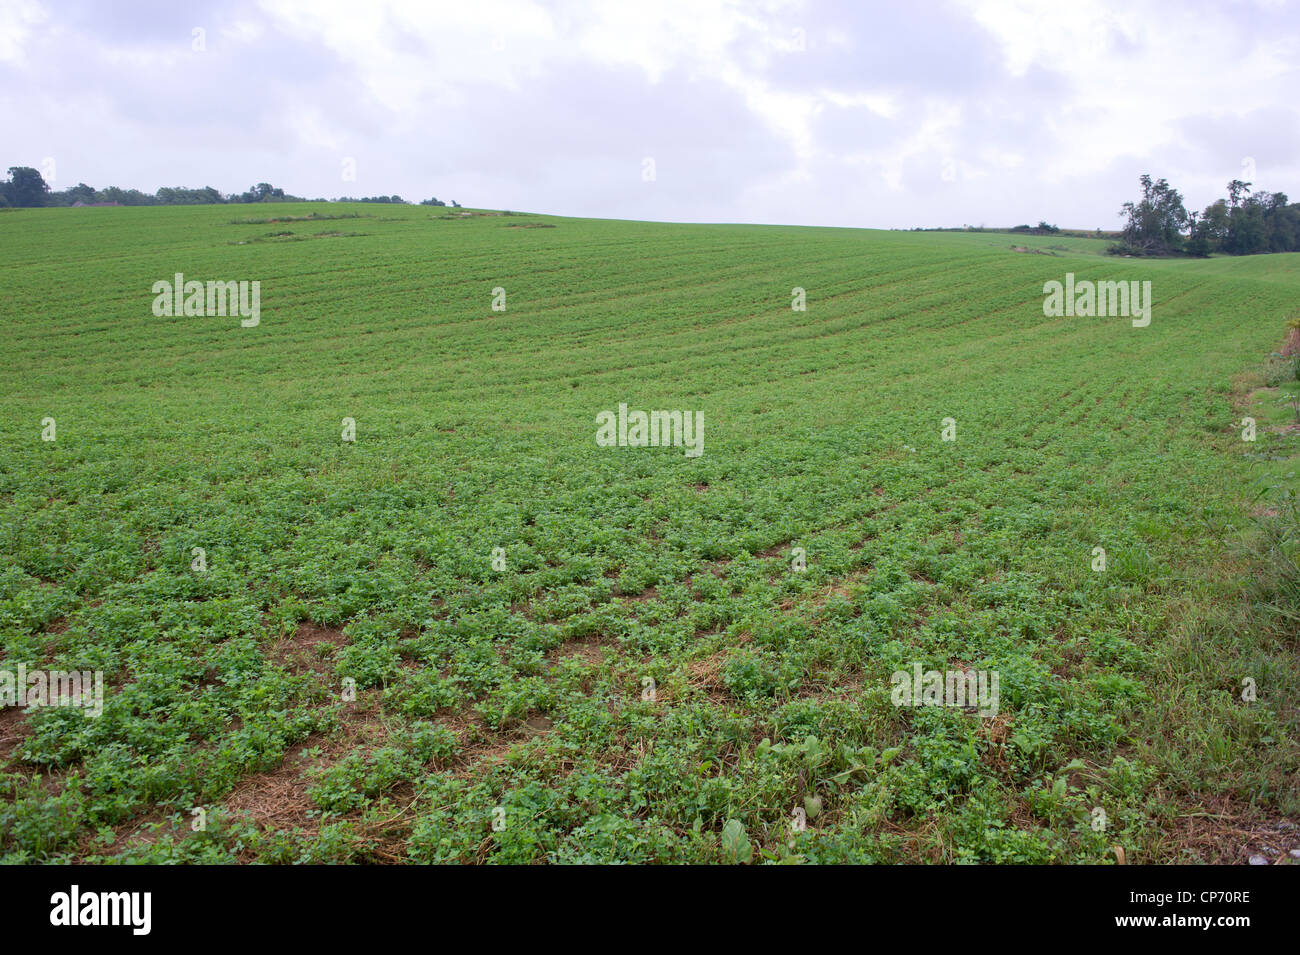 Field of clover Stock Photo